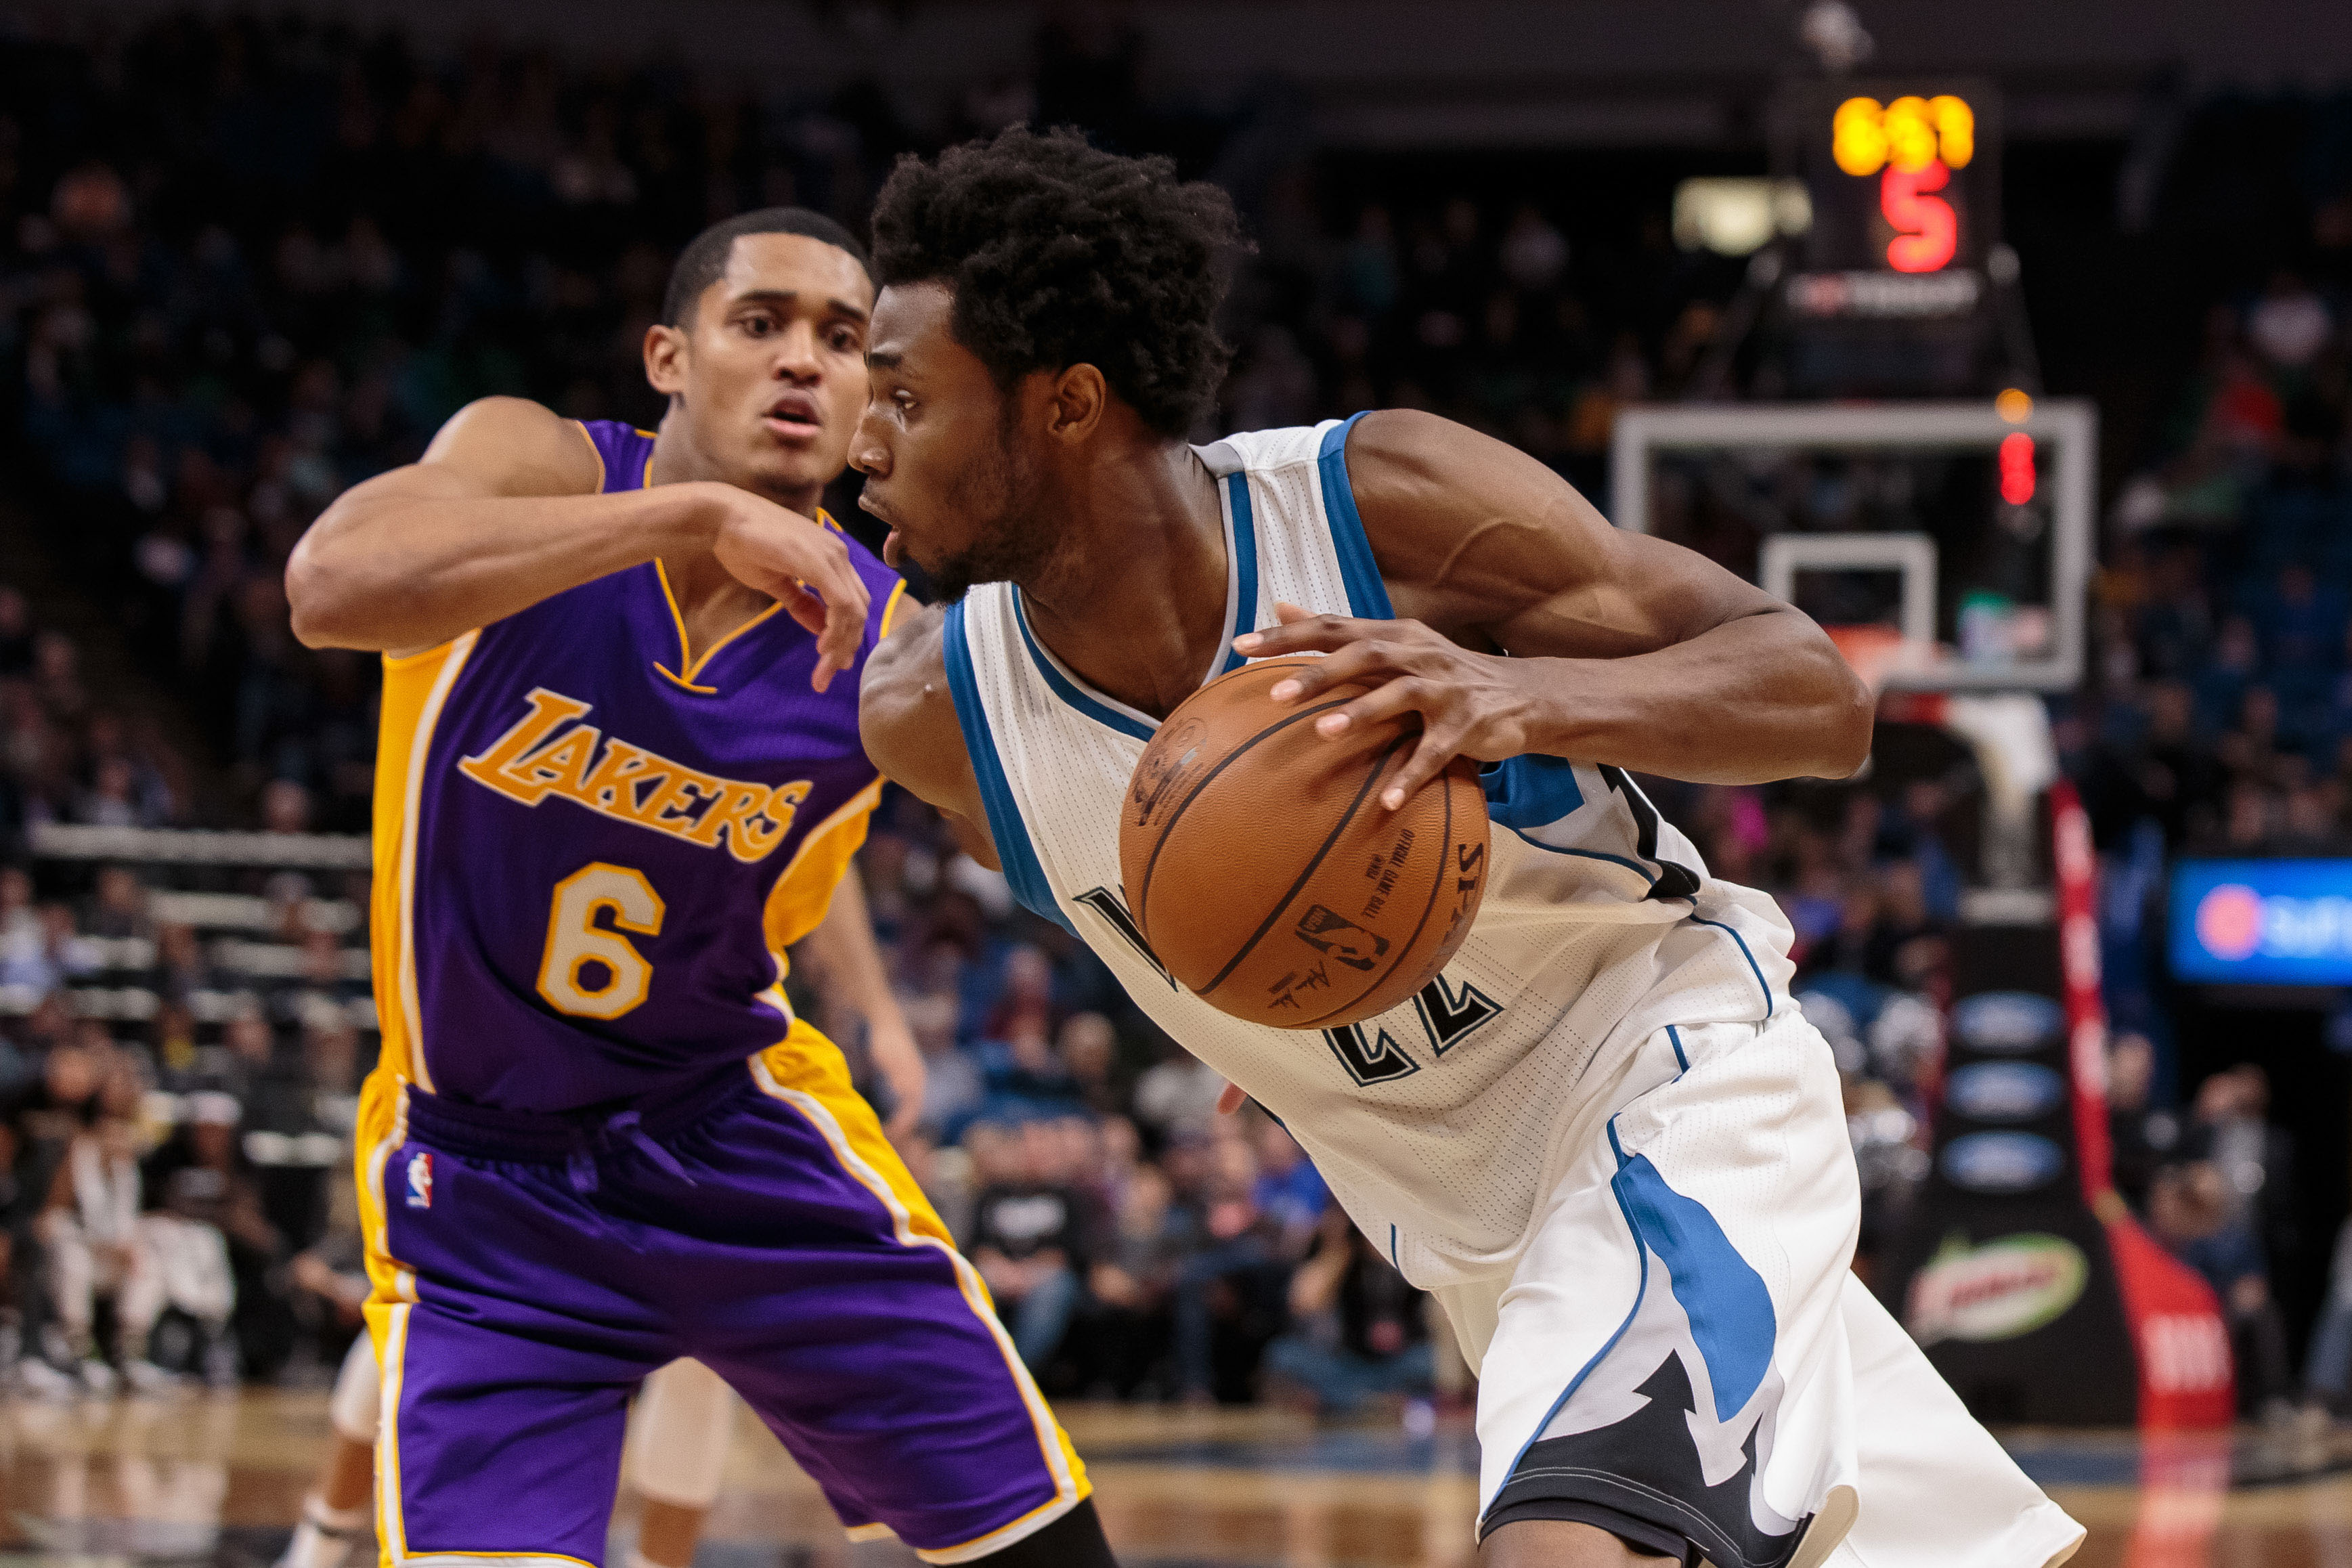 Timberwolves at Lakers live stream: How to watch online